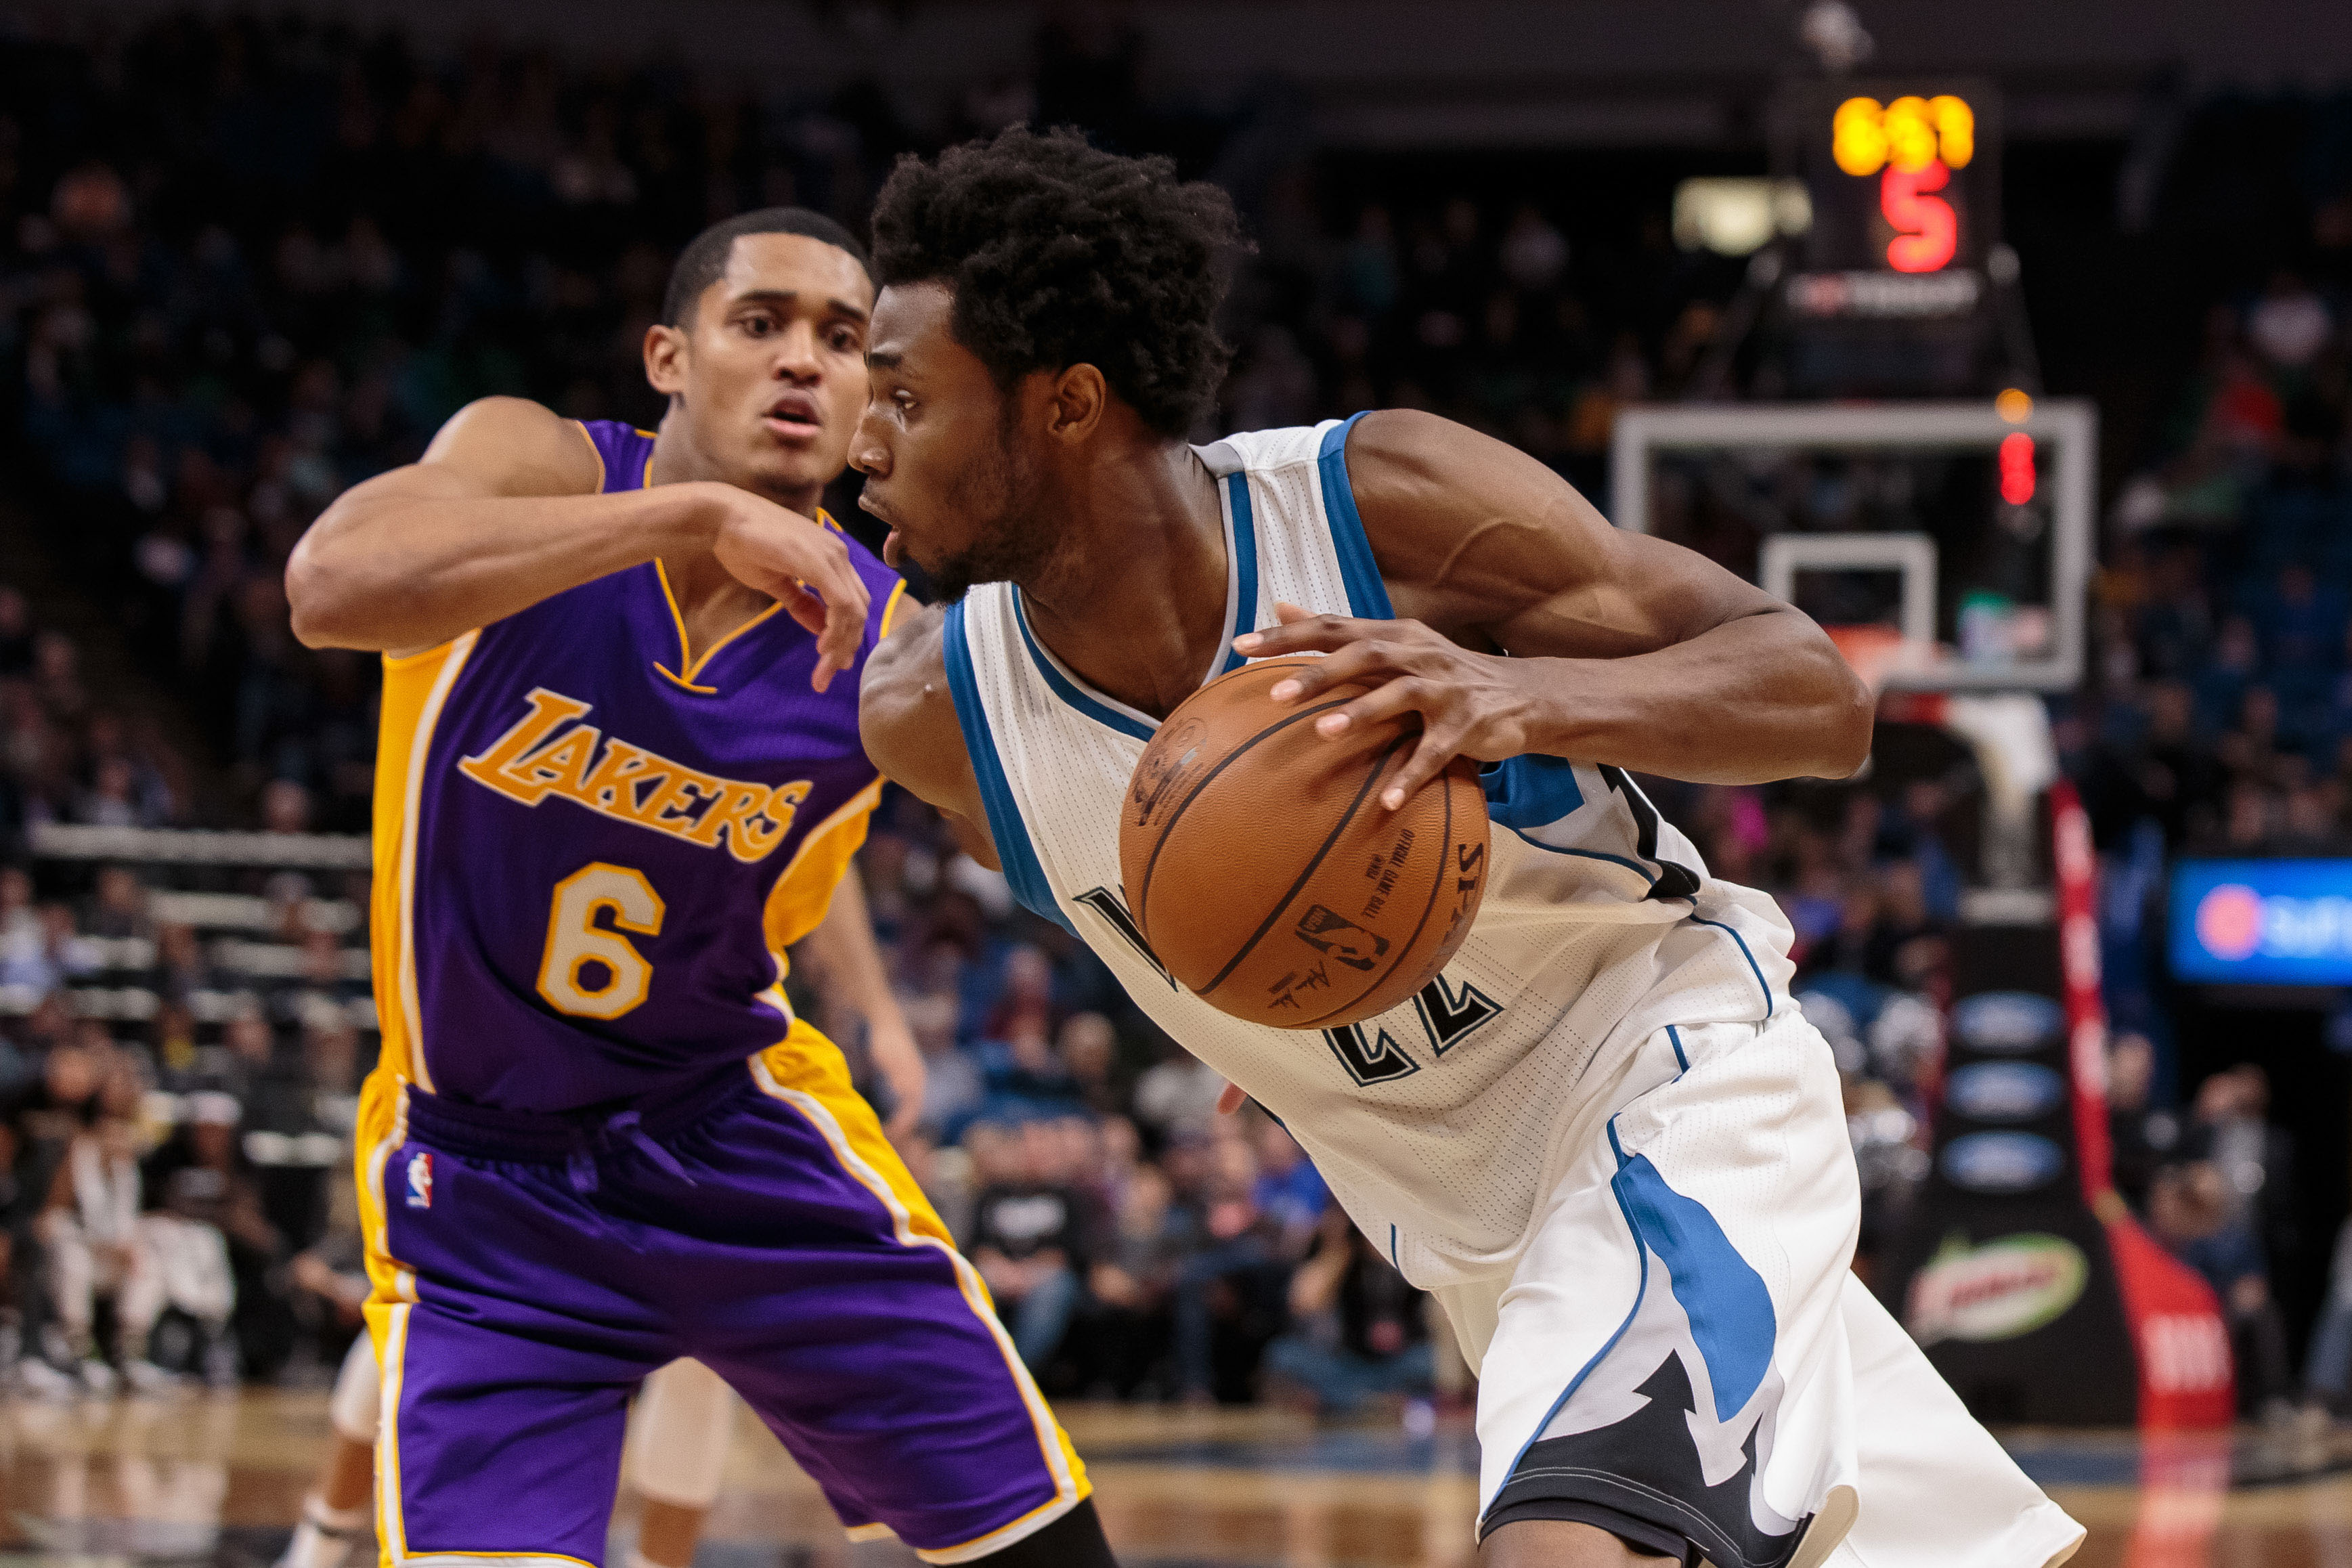 Timberwolves at Lakers live stream: How to watch online